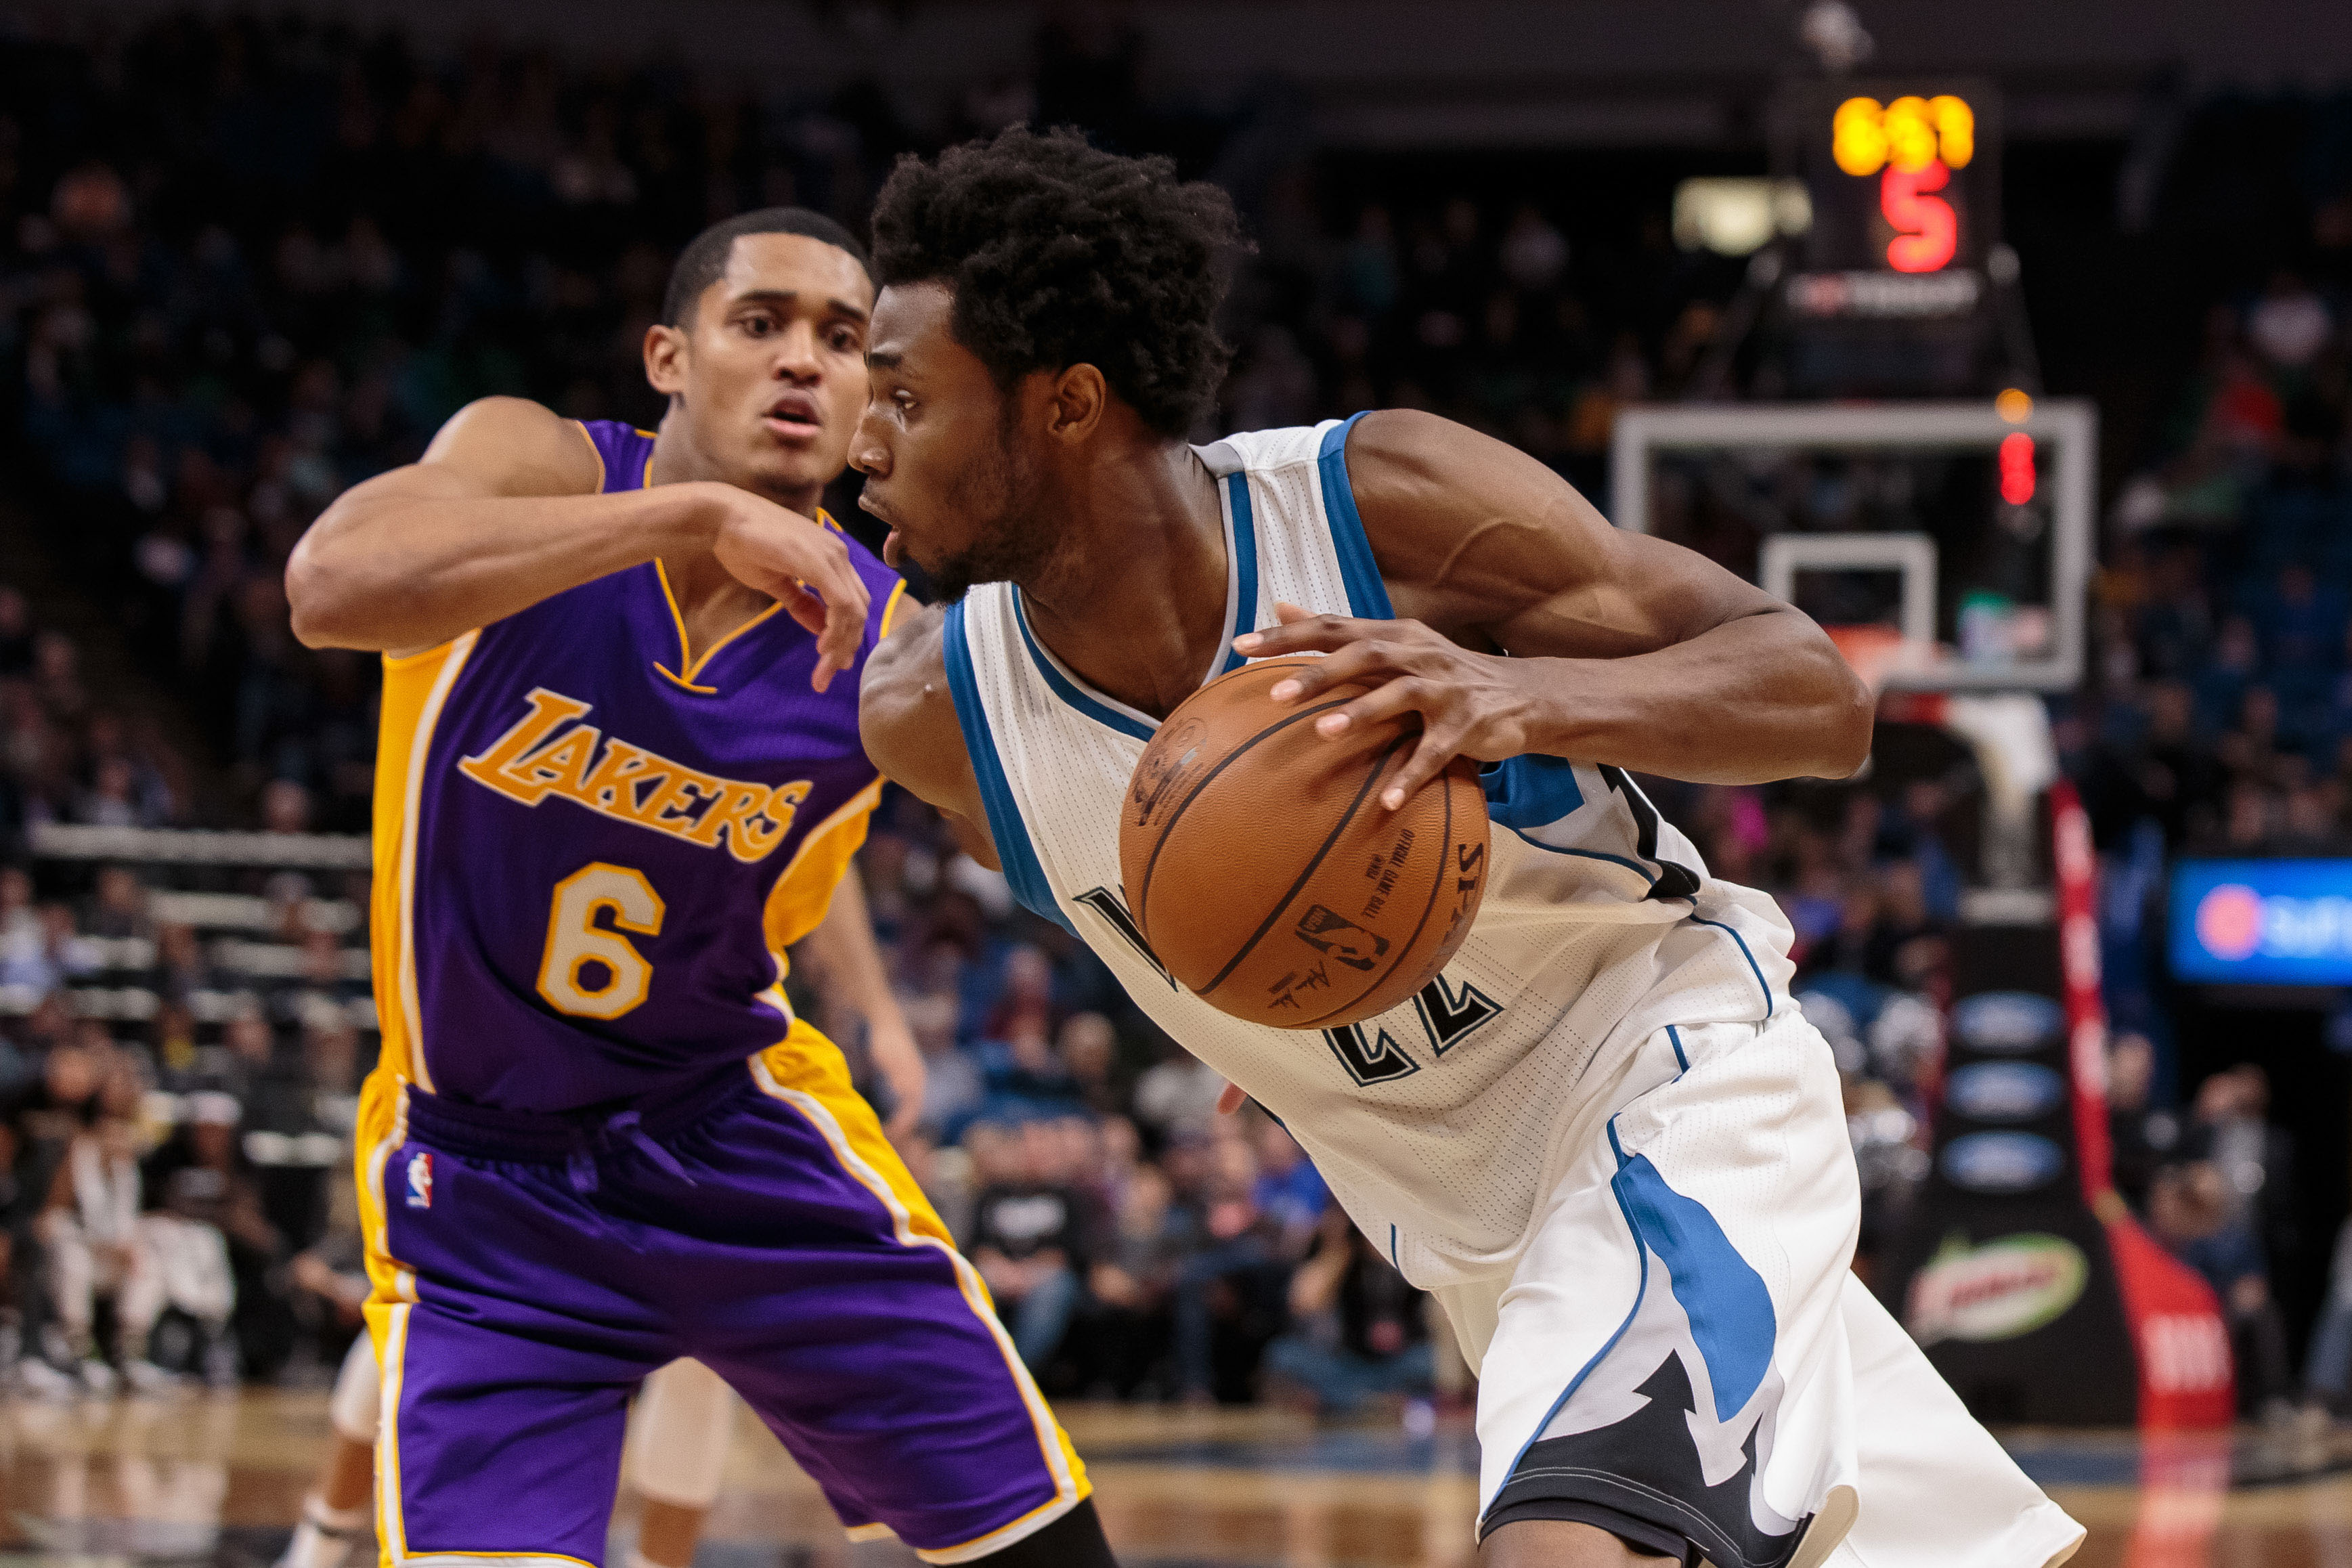 Timberwolves at Lakers live stream: How to watch online